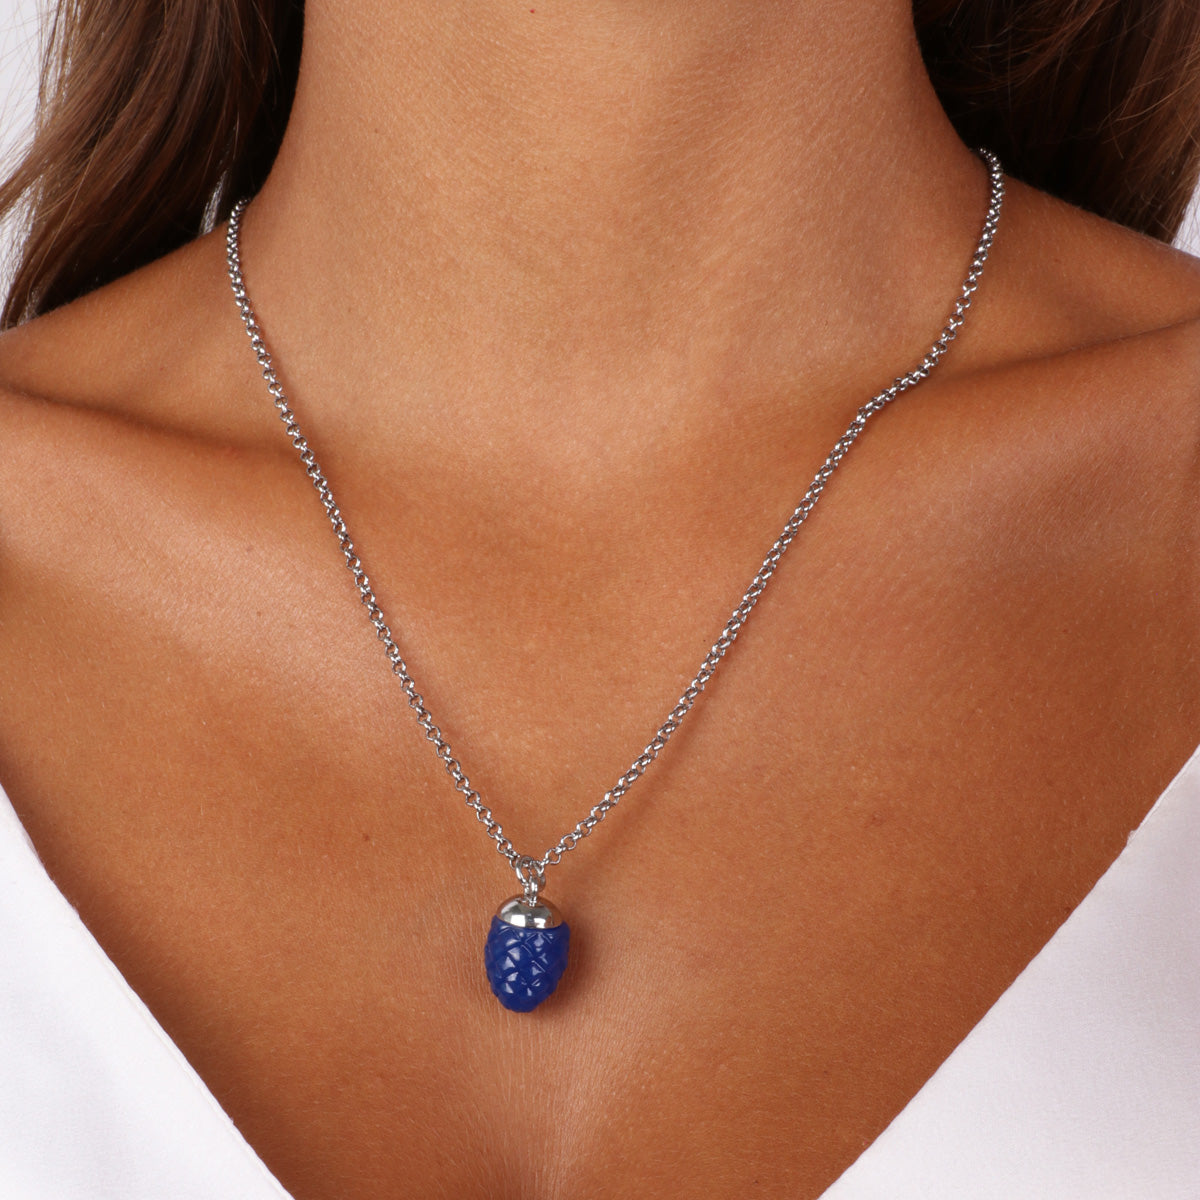 Metal necklace with blue enamel charming pine -shaped pendant